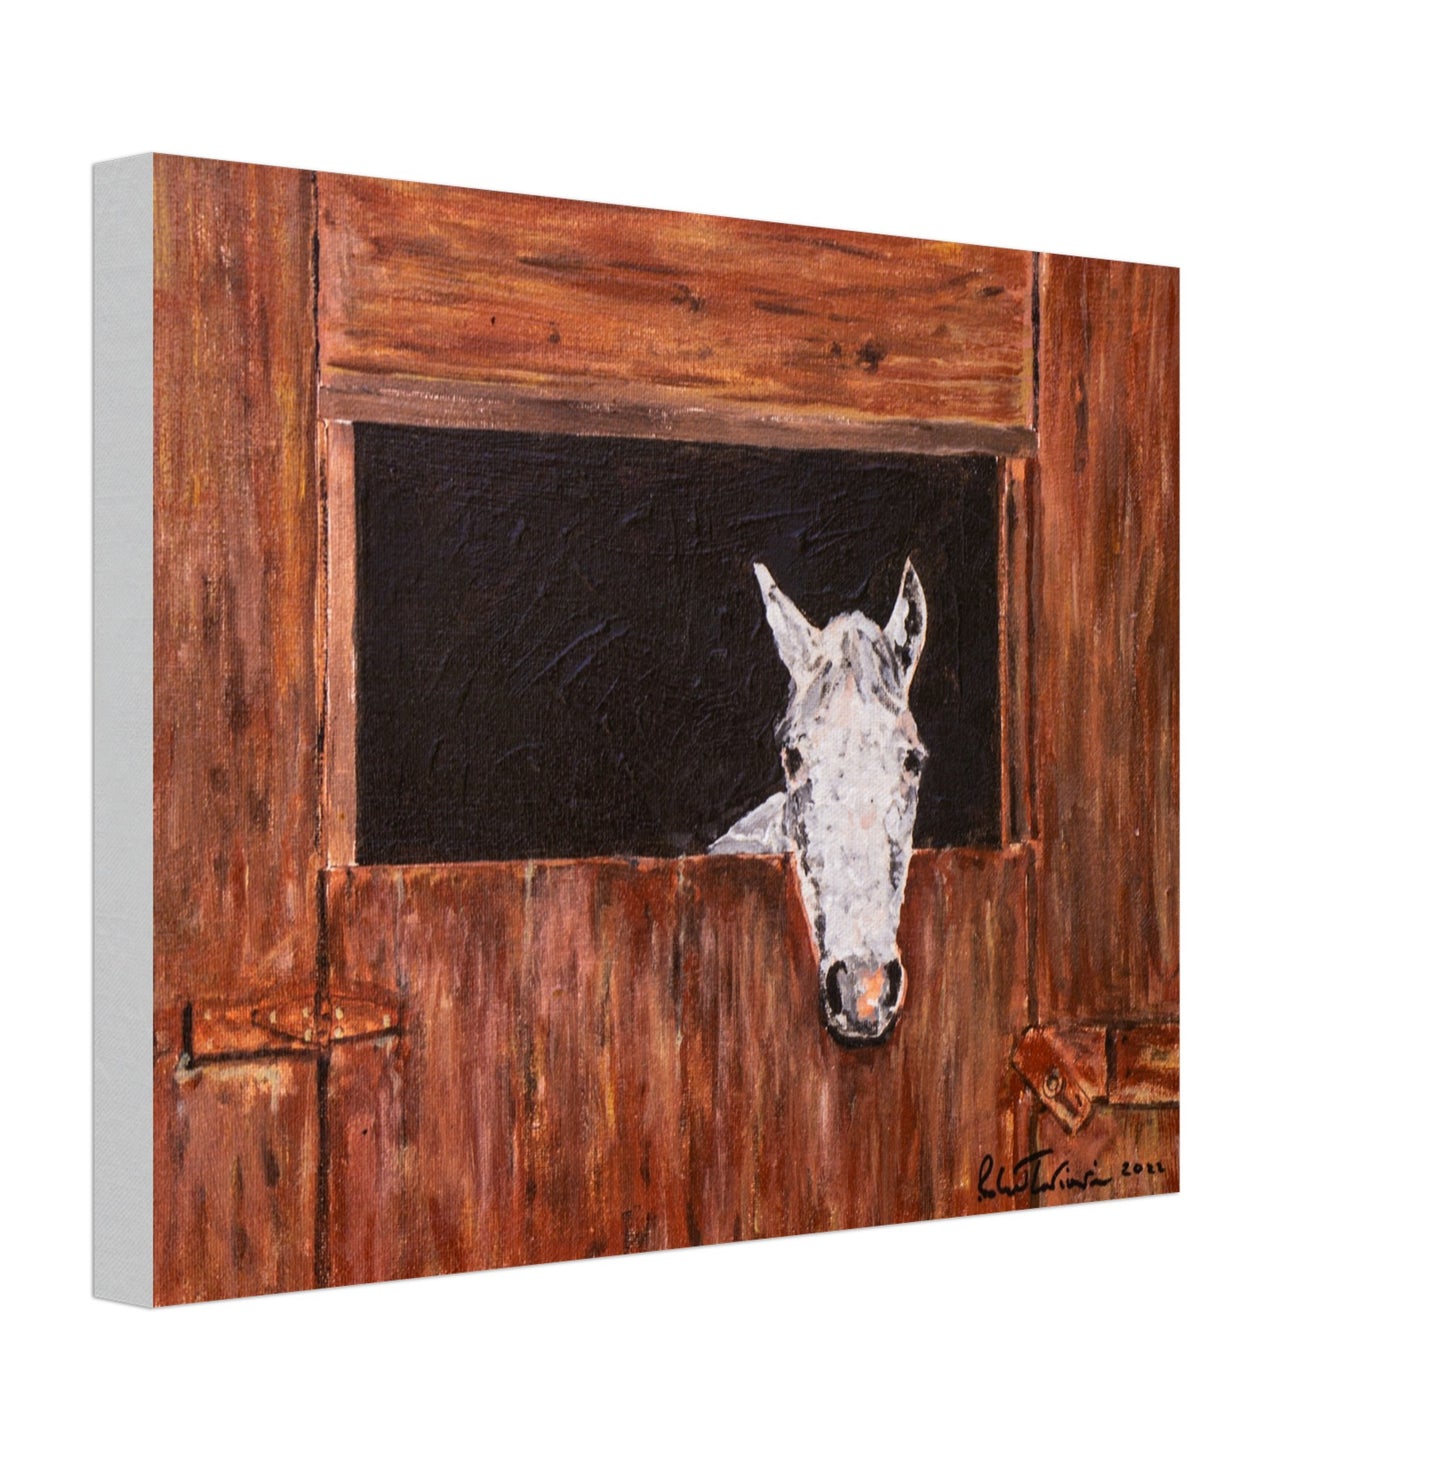 White Horse In Stall - Canvas